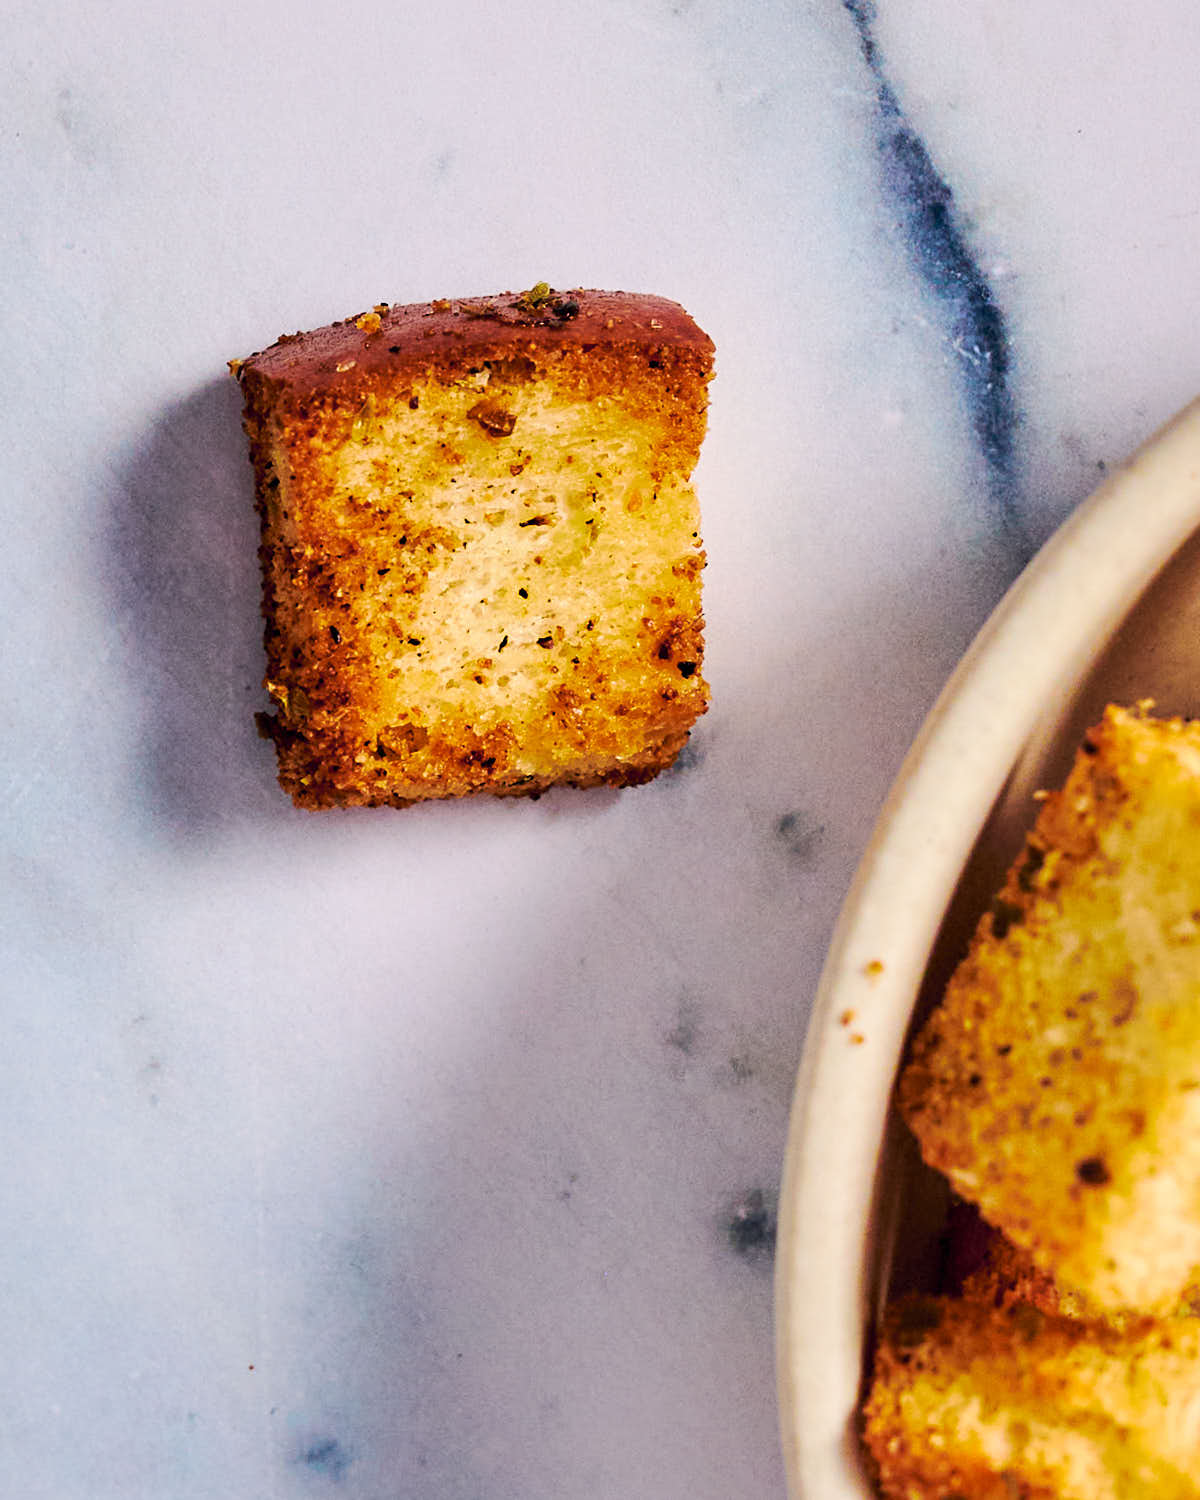 Seasoned air fryer croutons made from white sandwich bread.